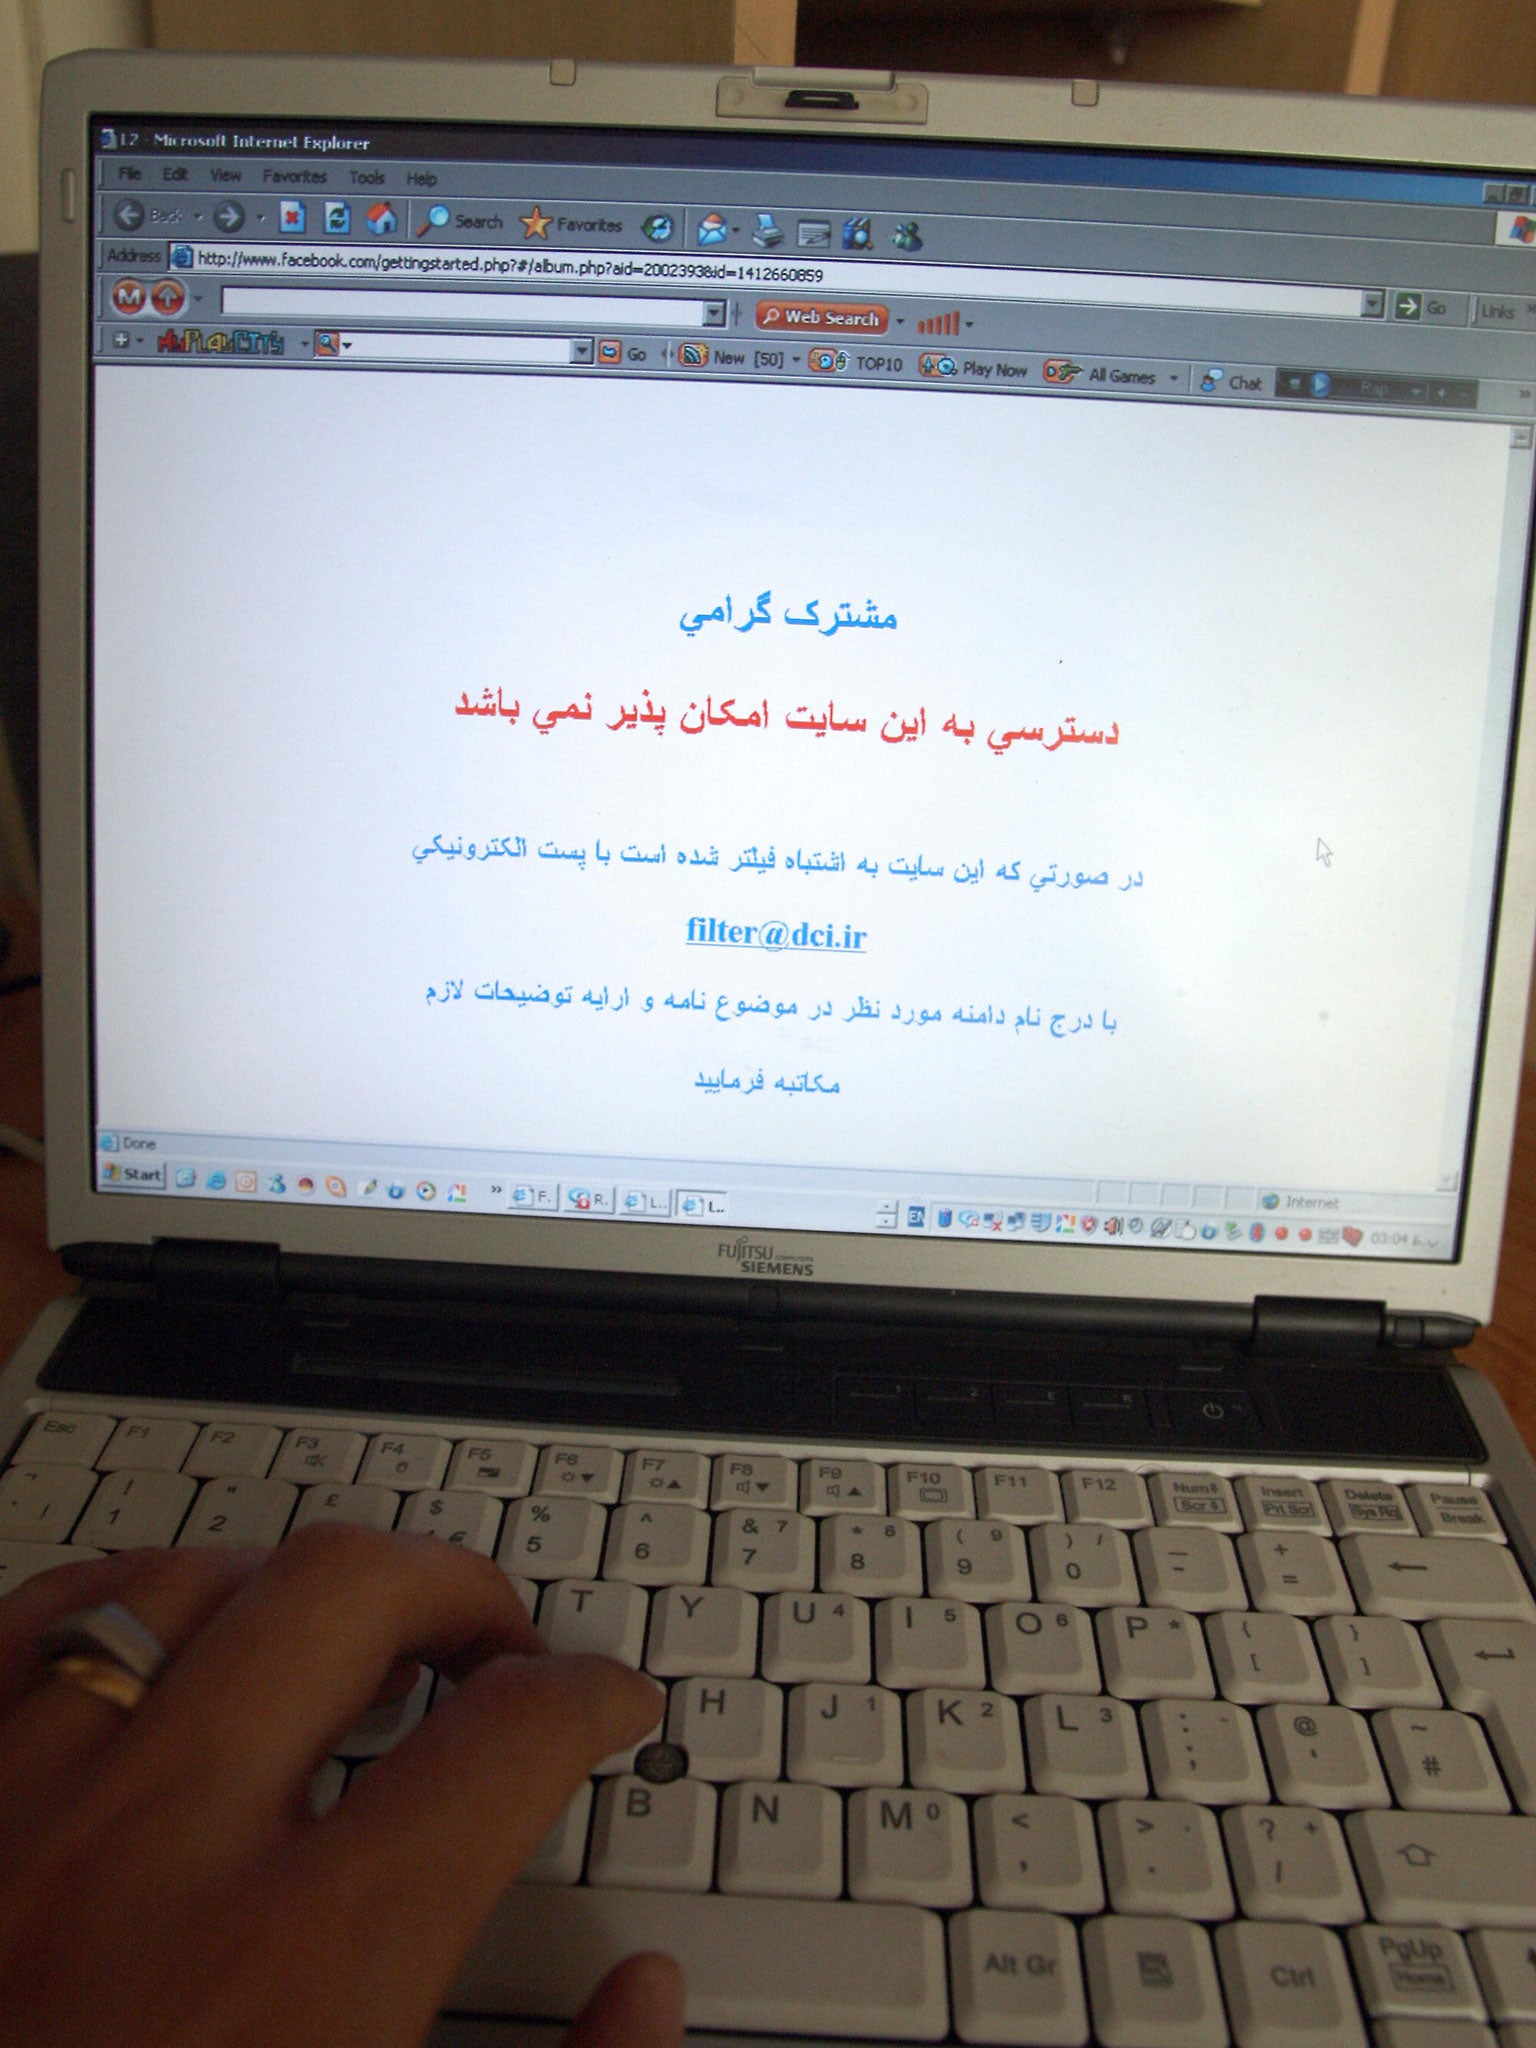 File: An Internet user tries to log onto Facebook in Tehran. A message in Farsi reads "Dear subscriber, access to this site is not possible...."